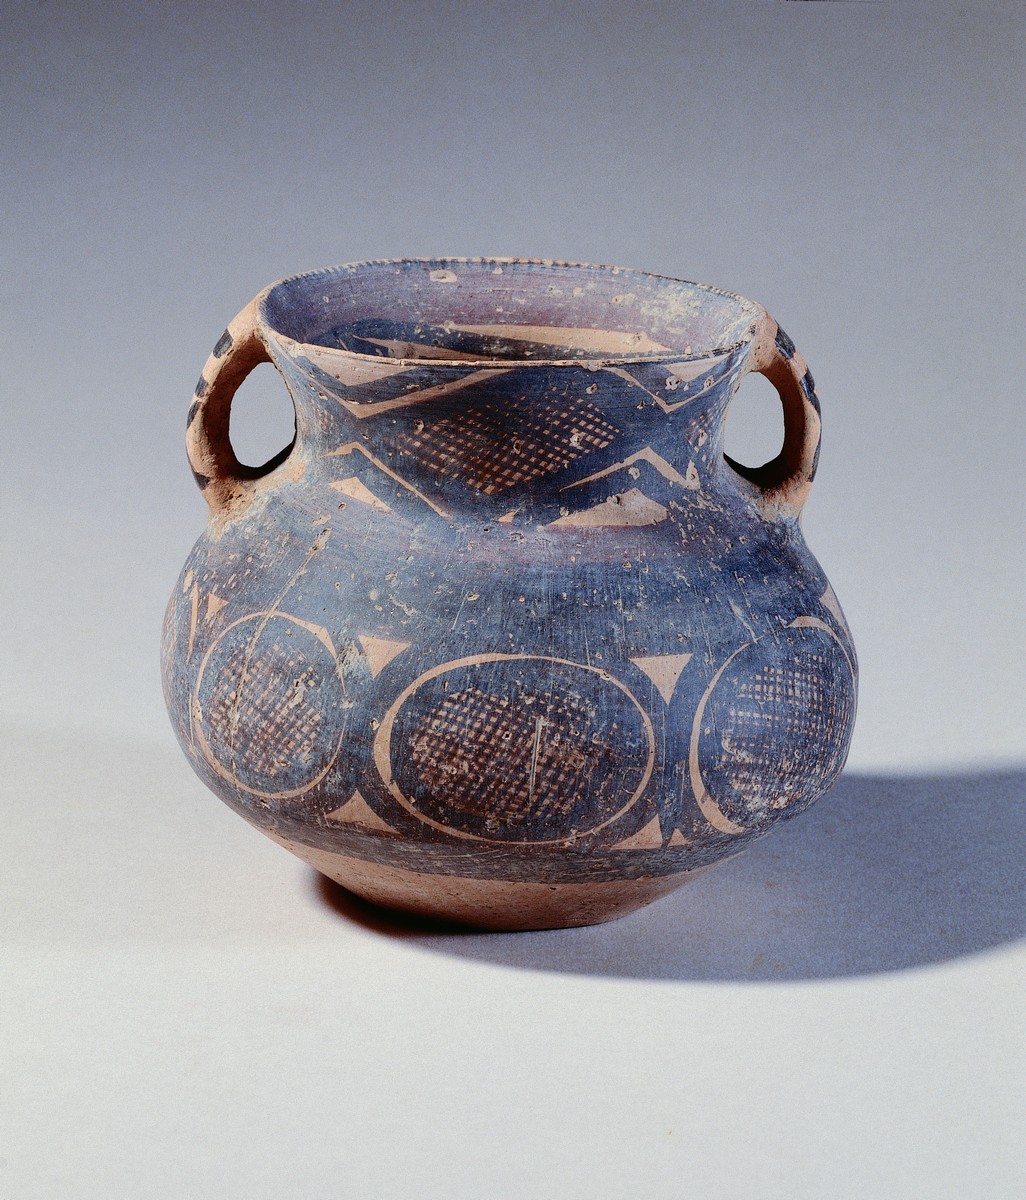 Pot with Circular Nets and Two Handles from Machang, Gansu